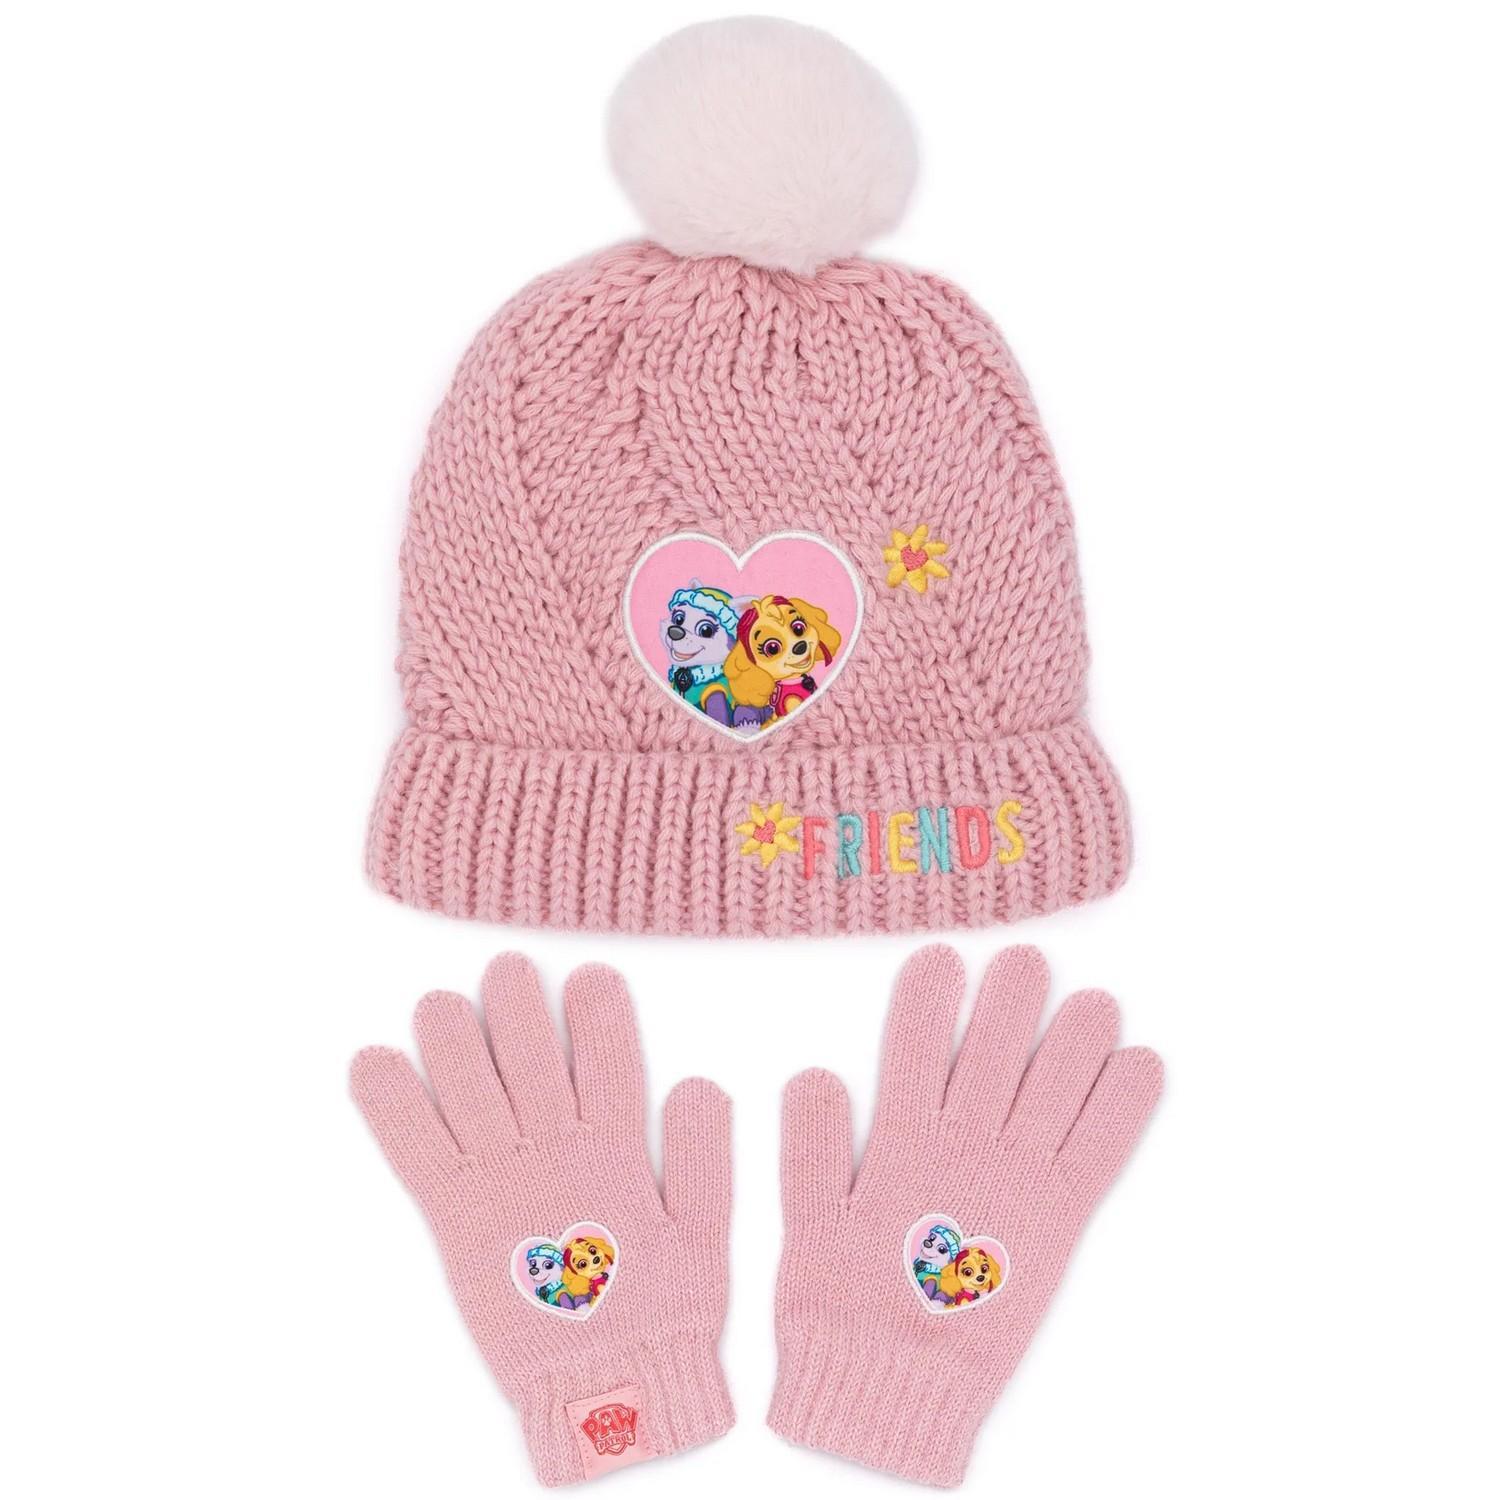 Paw Patrol Girls Friends Knitted Hat And Gloves Set (Pink) (One Size)